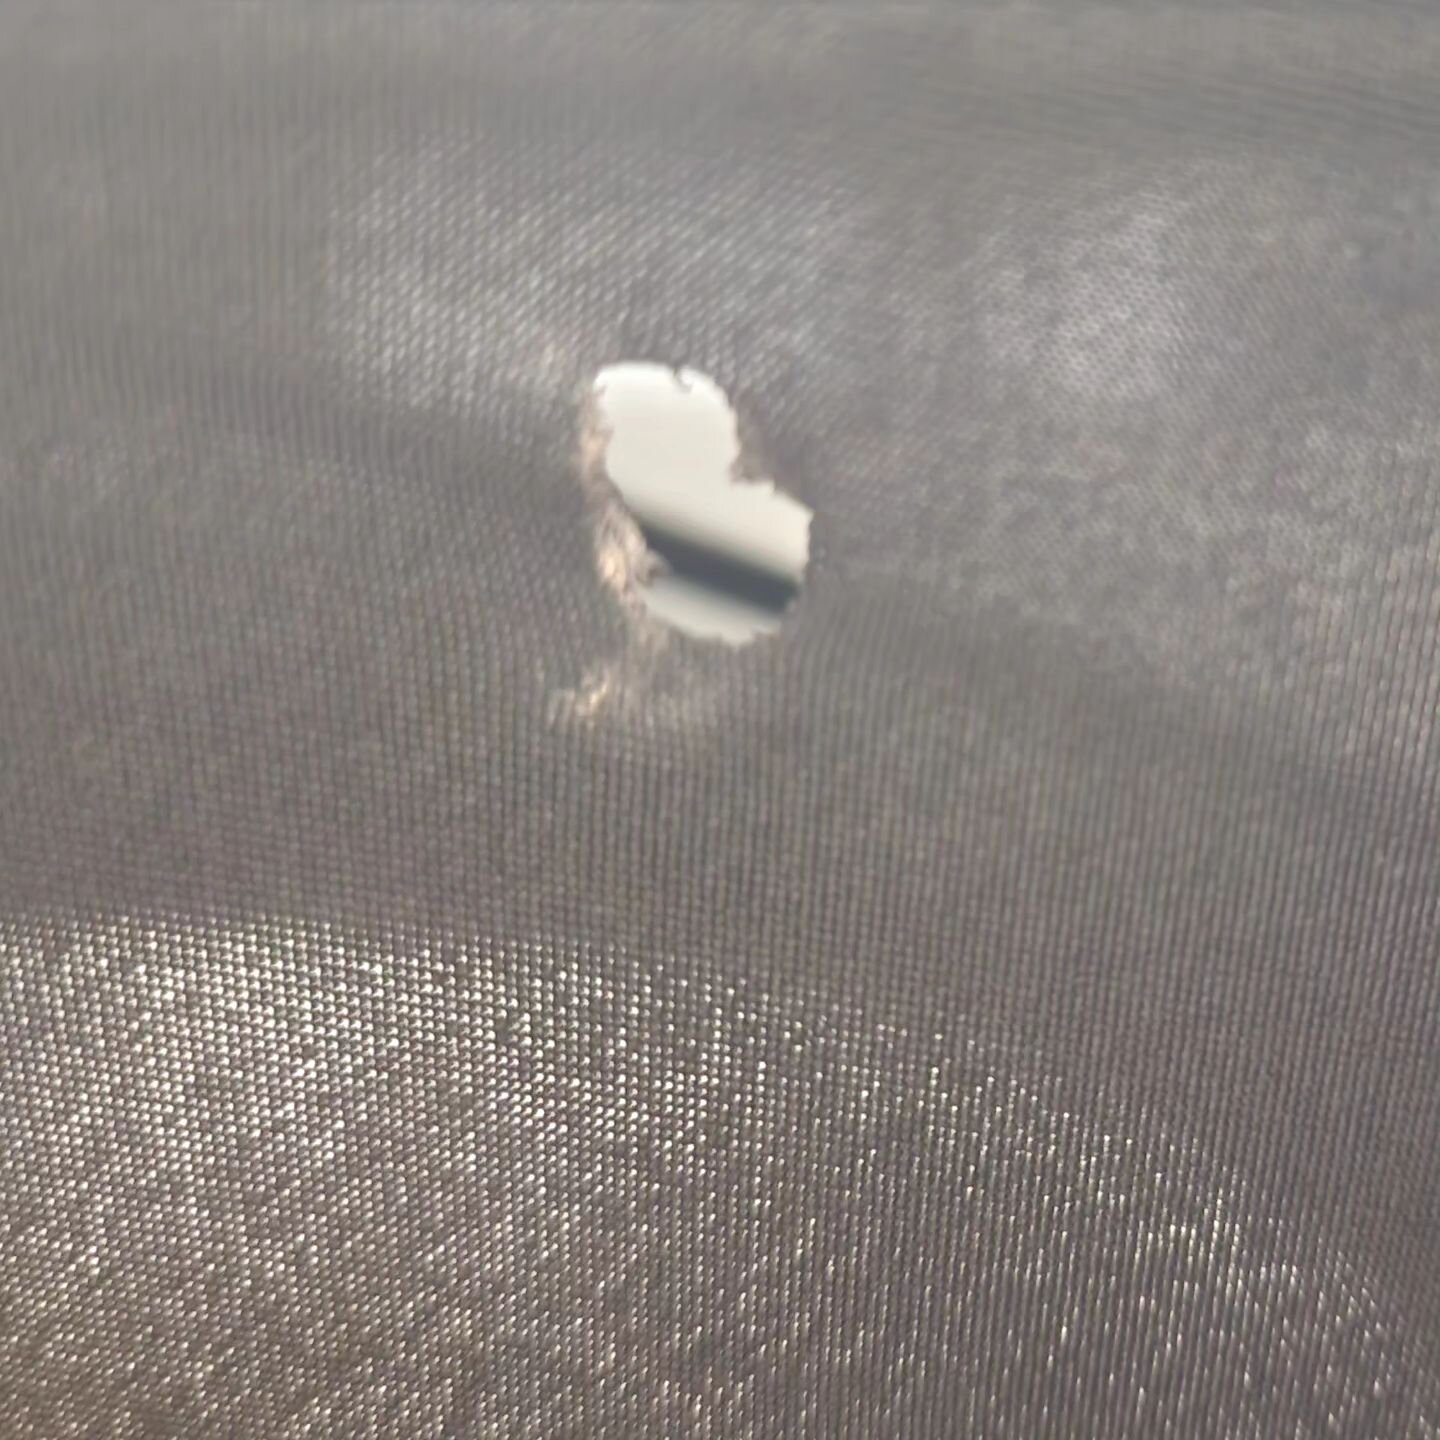 It finally happened .... someone burned a hole in the table cloth .... guess who in the comments below!